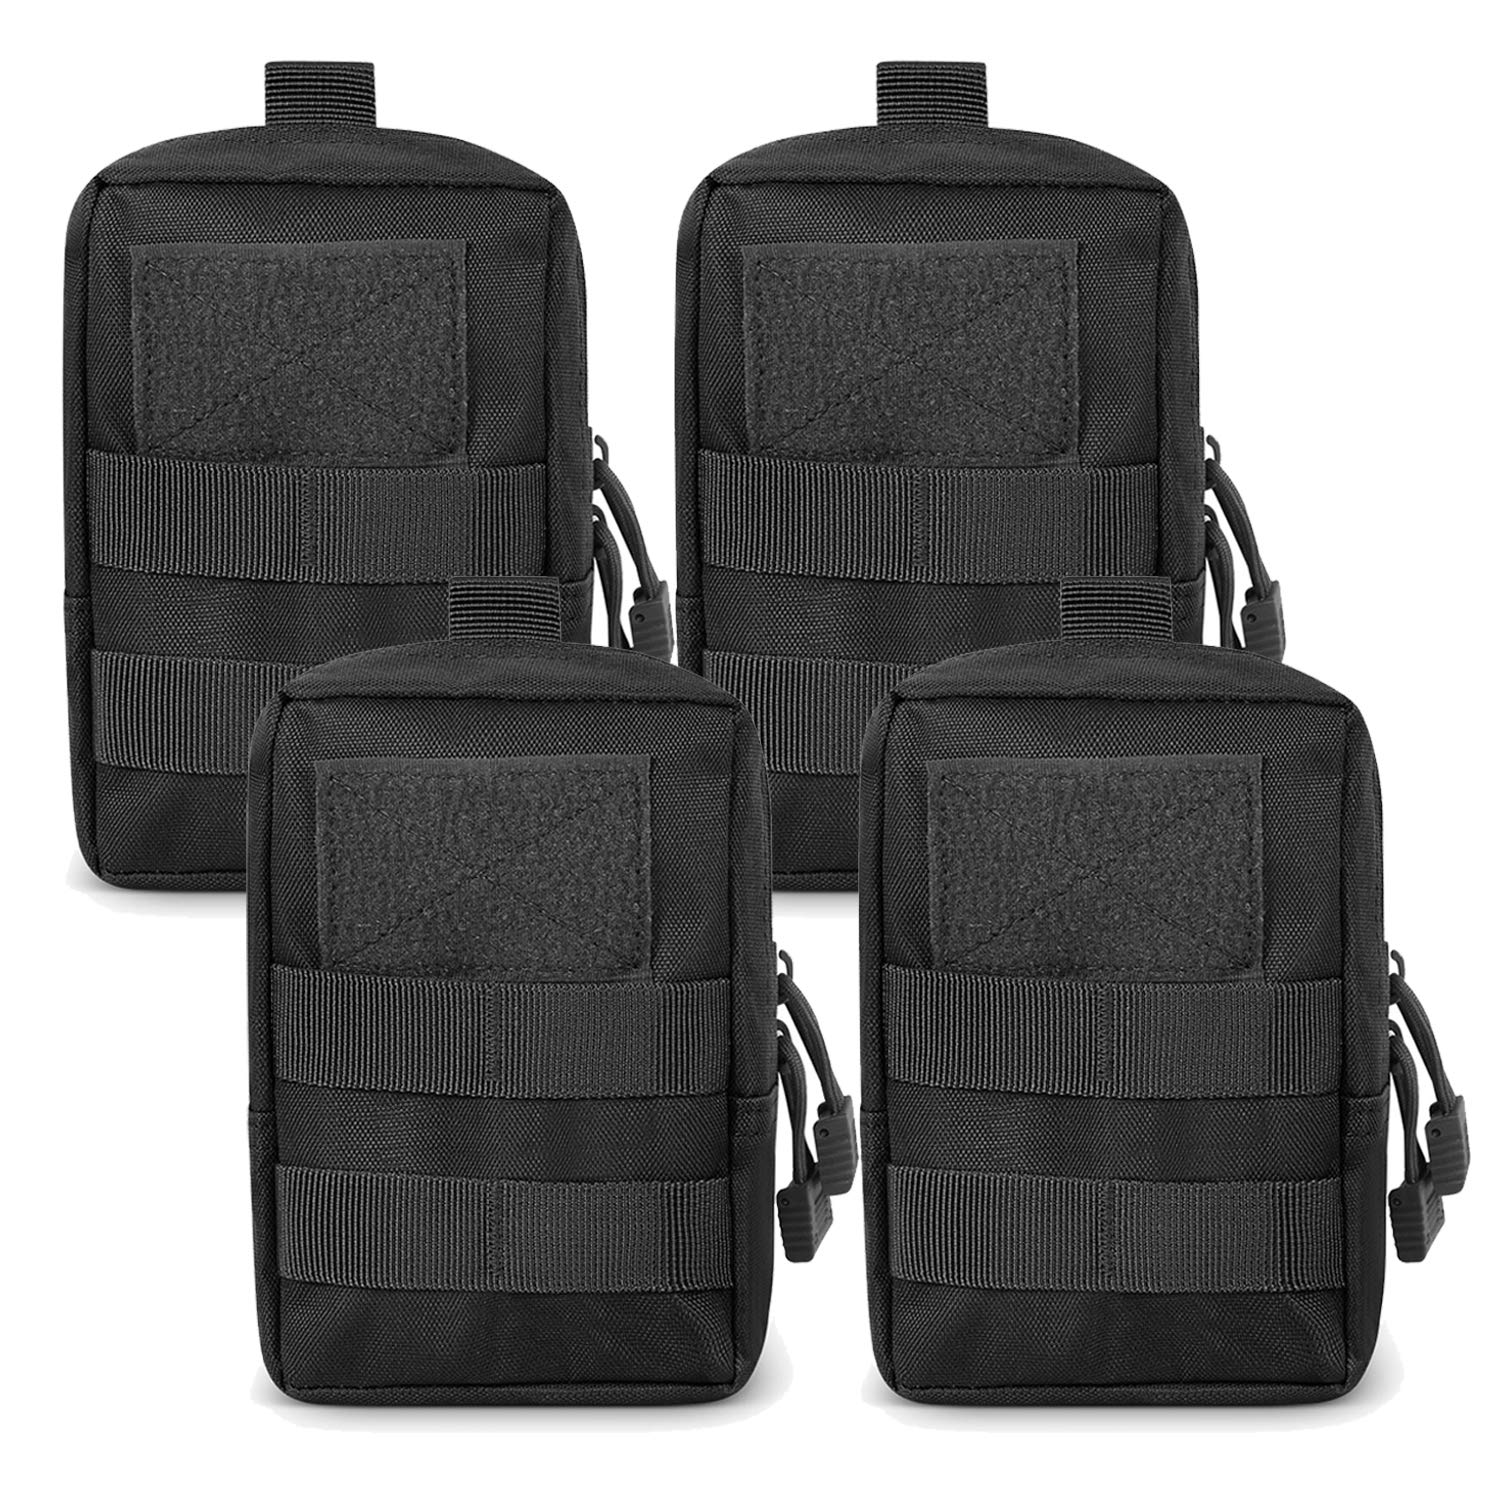 Gogoku 3-Pack Molle Pouch Combo Water Bottle Pouch Holder Tactical Molle  Pouches Compact Utility EDC Waist Bag Pack